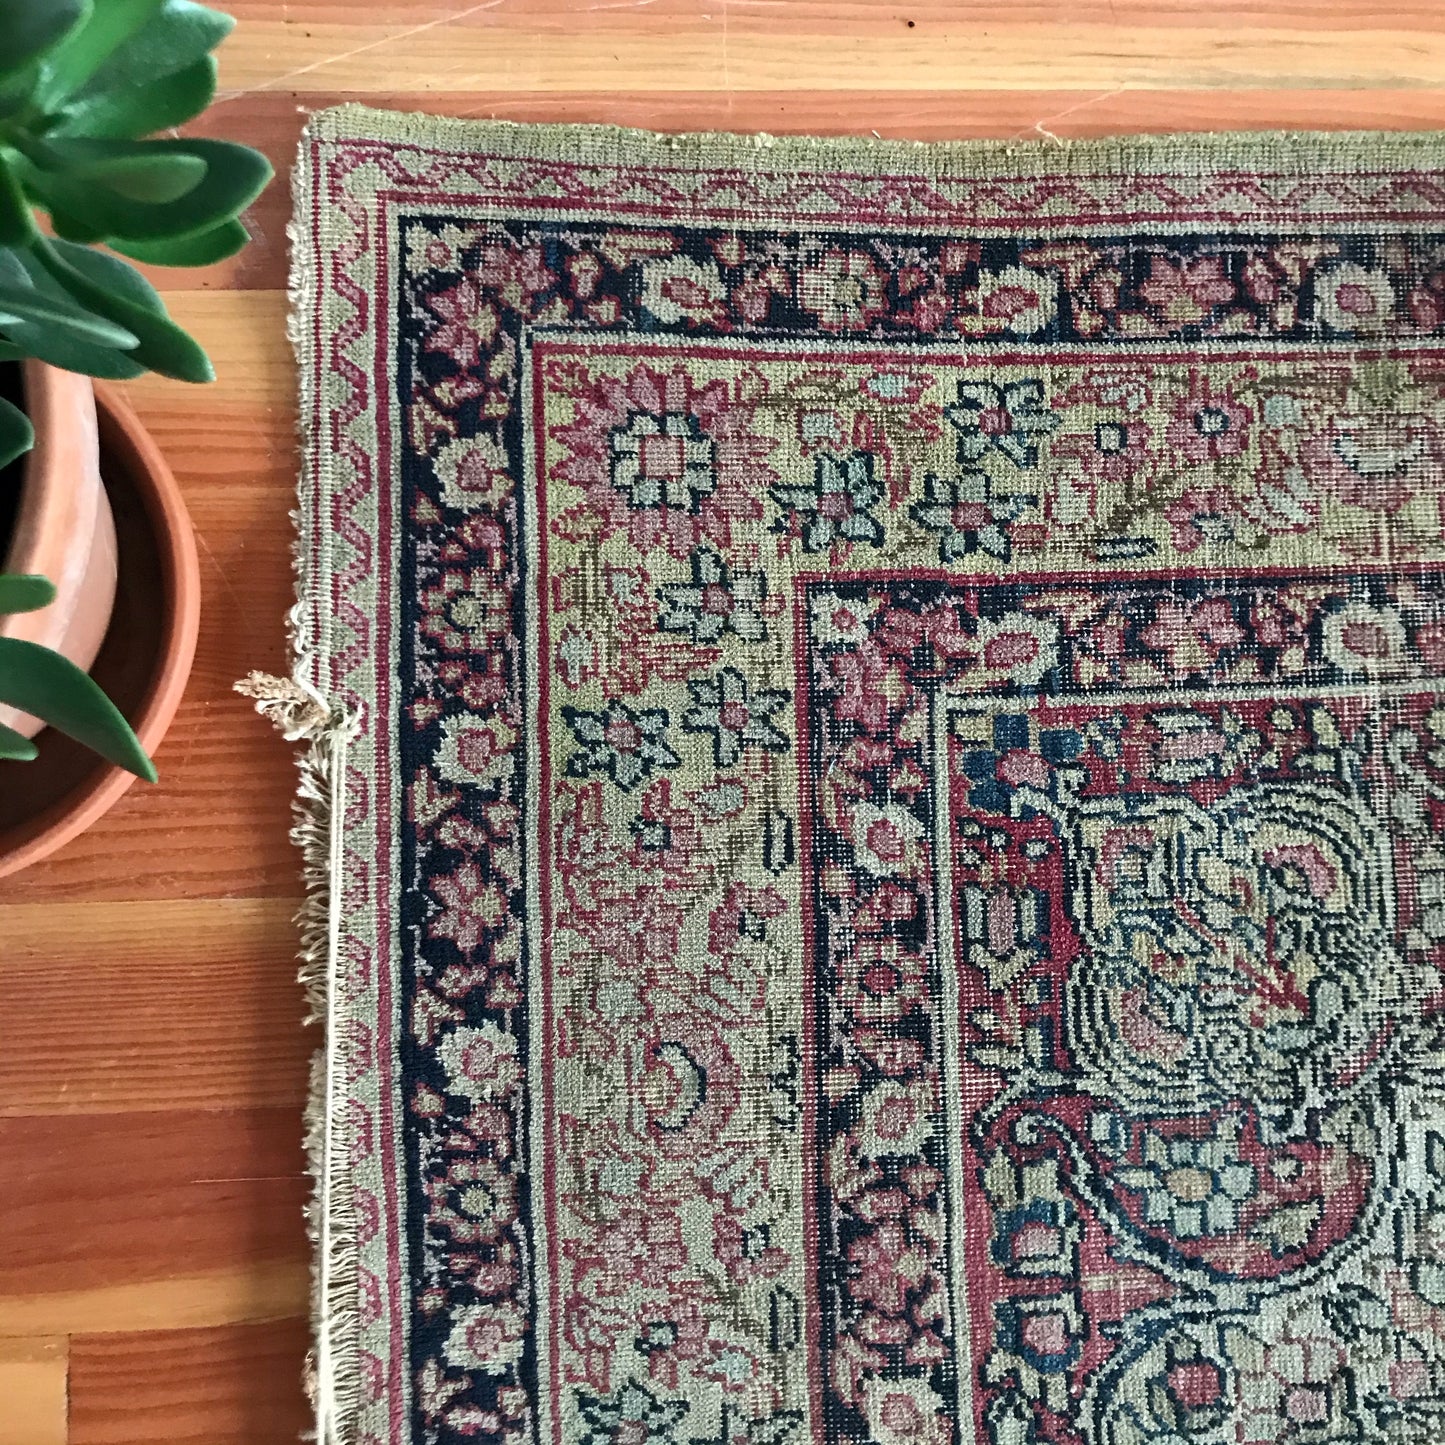 “ANNA” Antique Hand-knotted Rug (4.1 x 6.5)